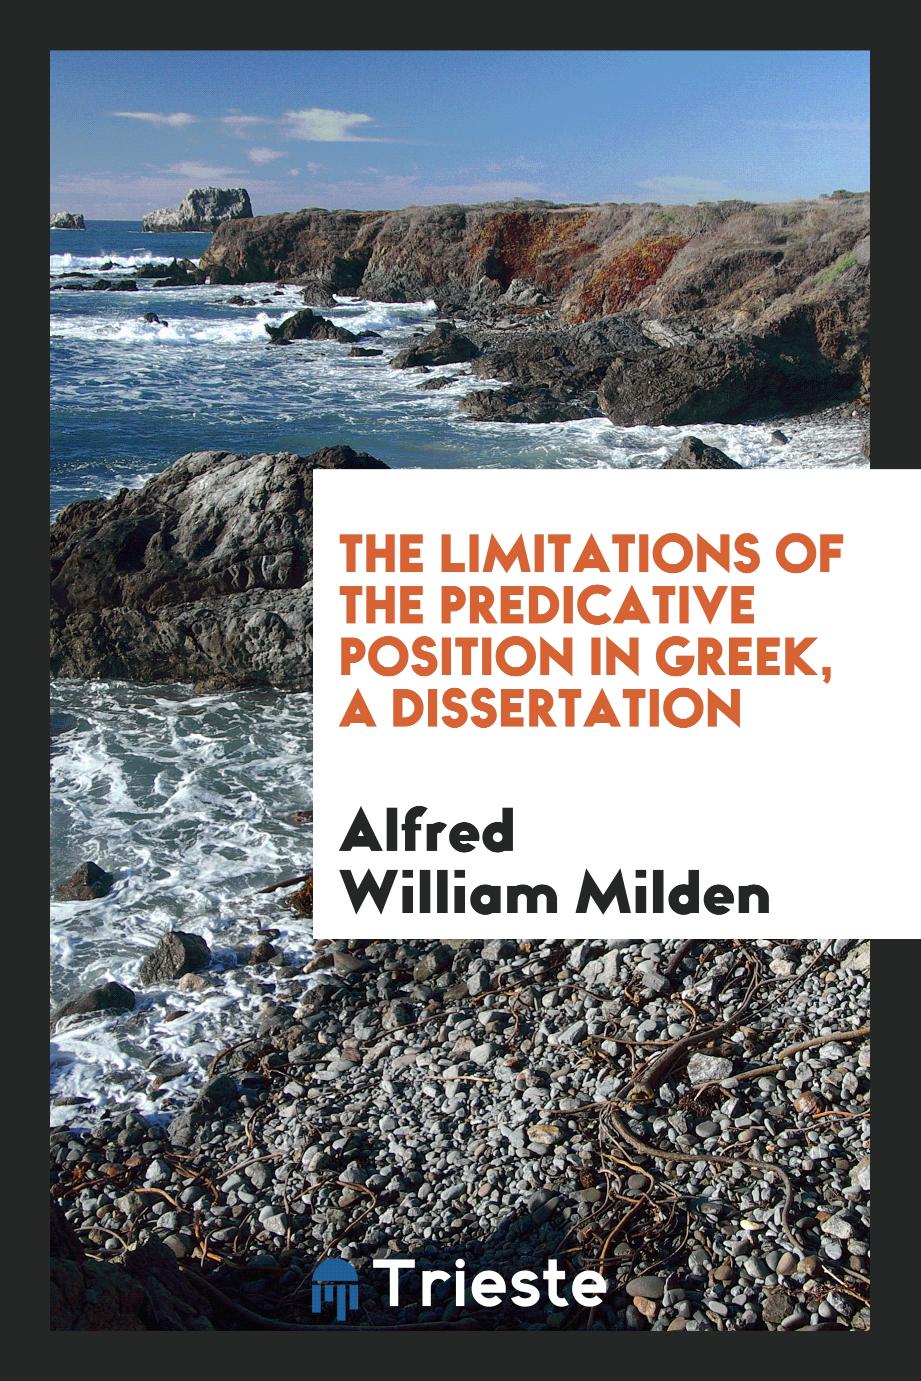 The limitations of the predicative position in Greek, A Dissertation